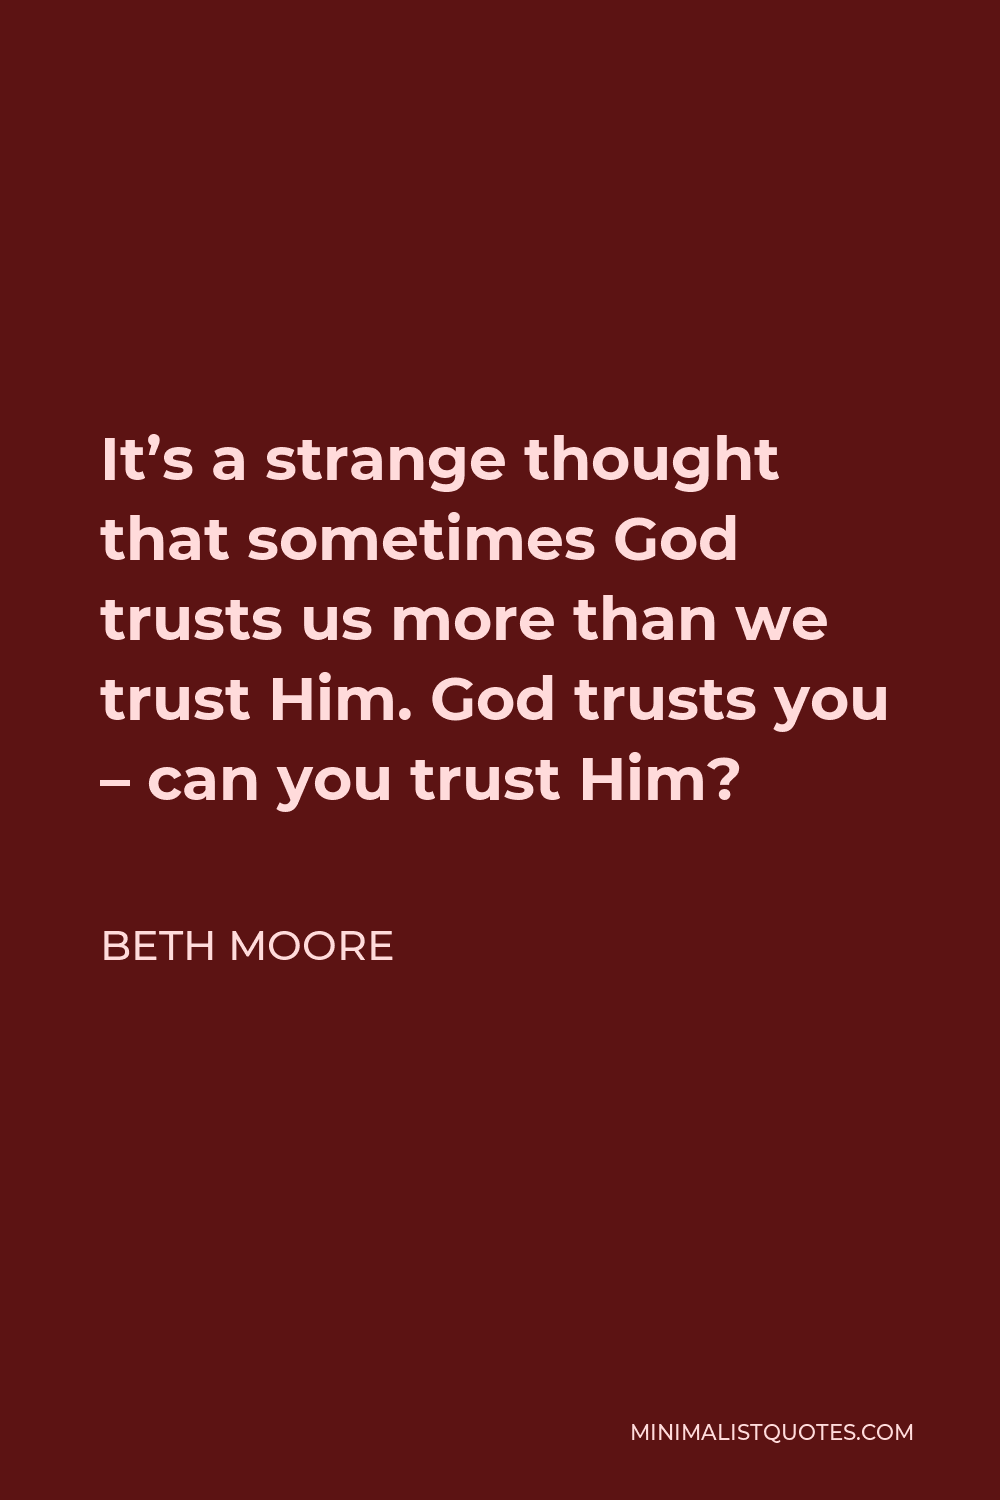 Beth Moore Quote - It’s a strange thought that sometimes God trusts us more than we trust Him. God trusts you – can you trust Him?